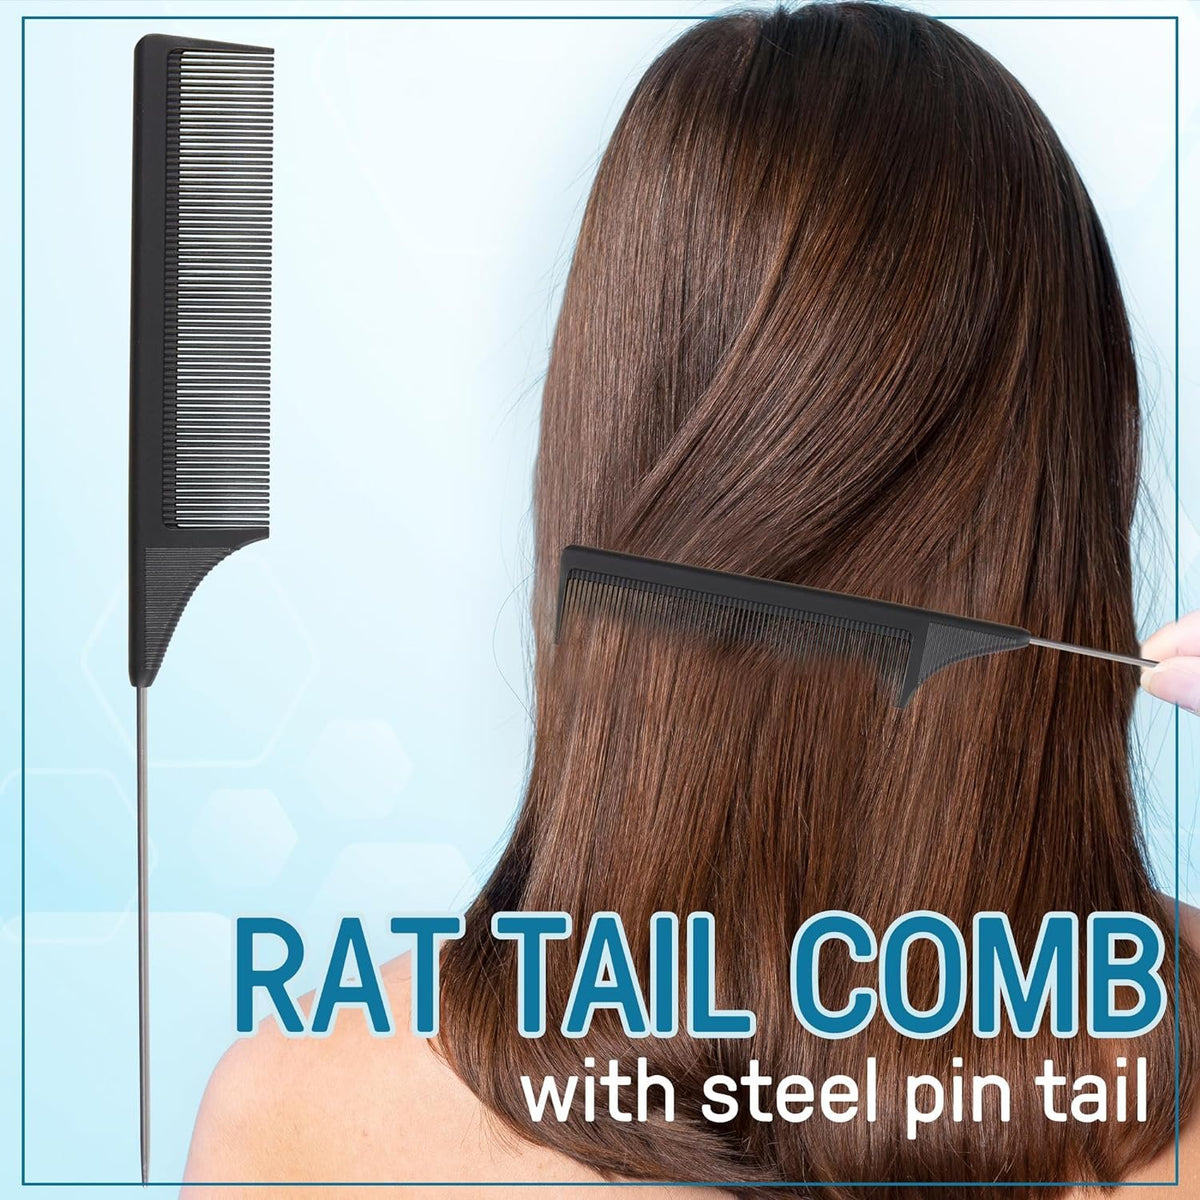 Carbon Fiber Rat Tail Combs - High Quality Carbon Fiber, Stainless Steel Pintail, Heat Resistant, Hair Comb Set for Braiding, Parting, and Styling, 9 Inches Long - Black